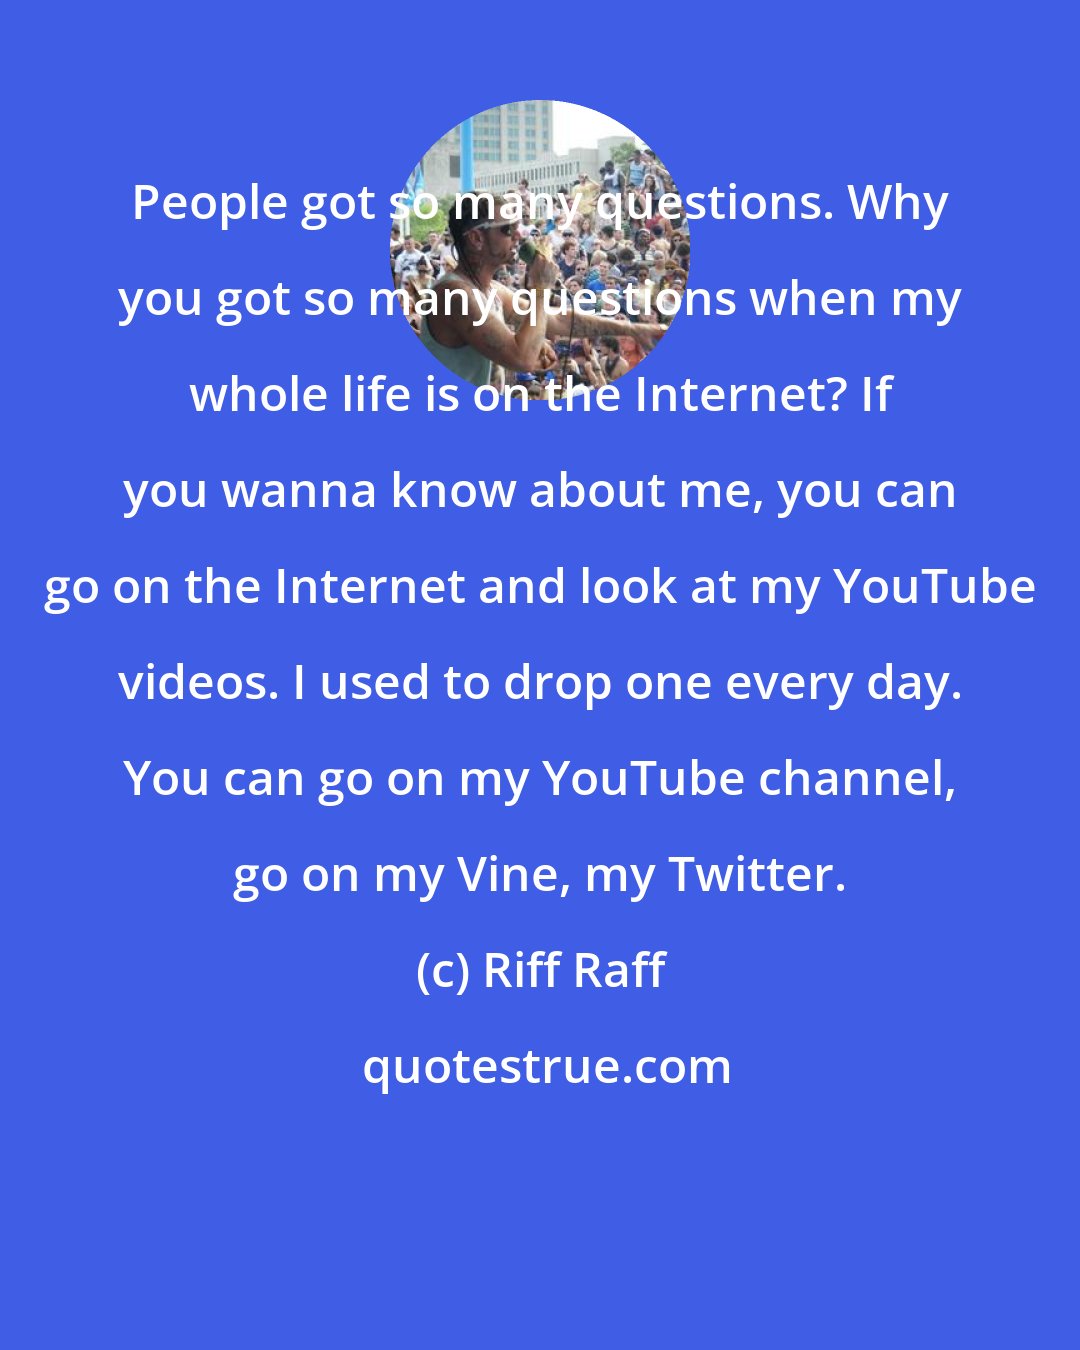 Riff Raff: People got so many questions. Why you got so many questions when my whole life is on the Internet? If you wanna know about me, you can go on the Internet and look at my YouTube videos. I used to drop one every day. You can go on my YouTube channel, go on my Vine, my Twitter.